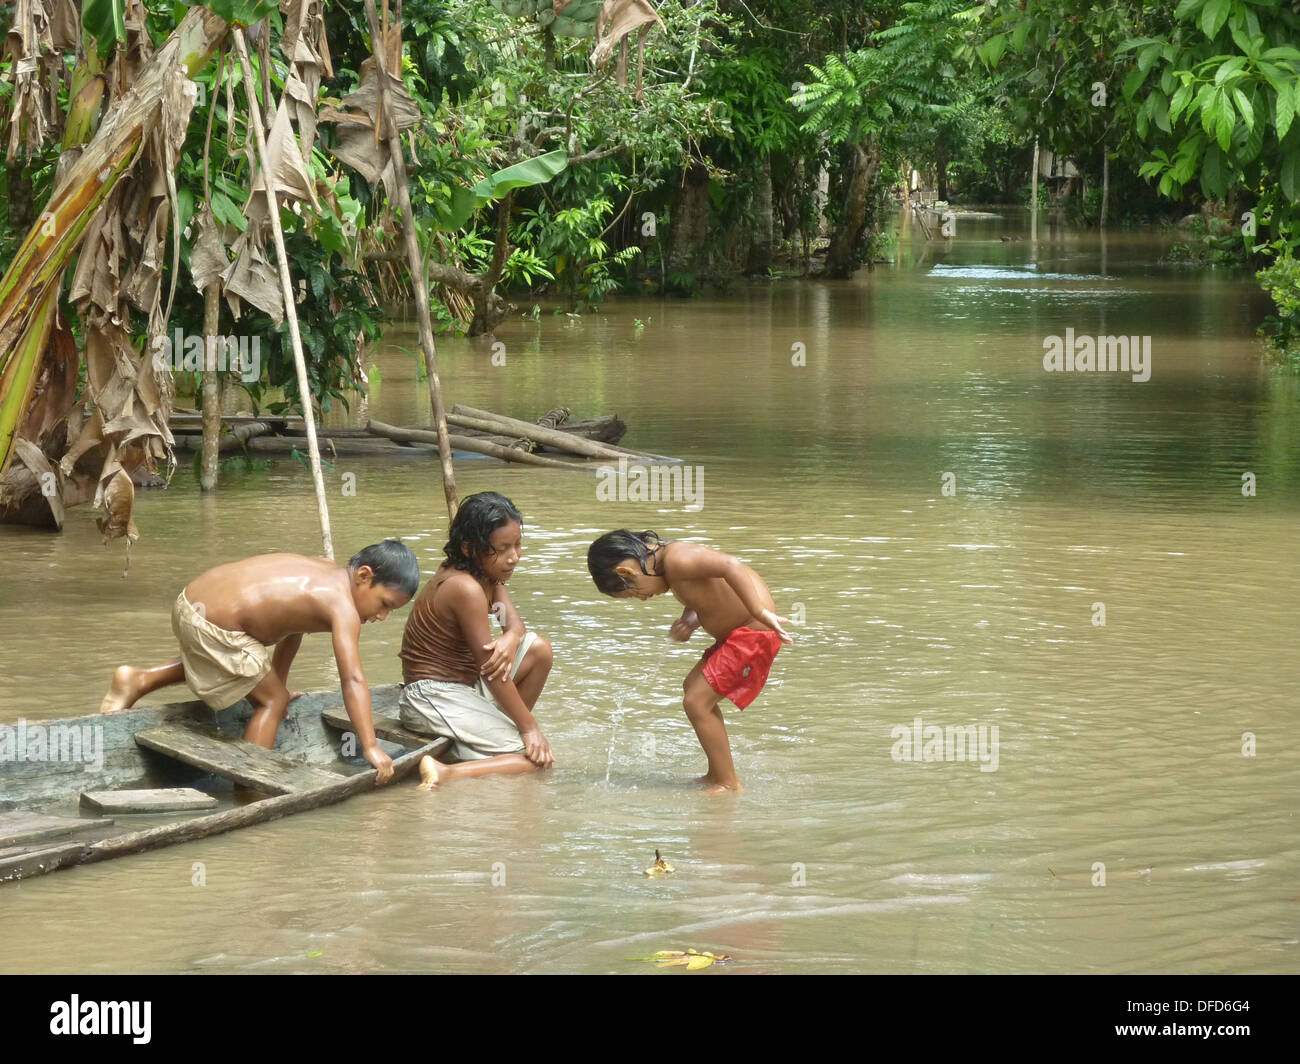 Children of the Yagua Tribe play with a wooden canoe in the Amazon rain forest near Iquitos, Peru Stock Photo